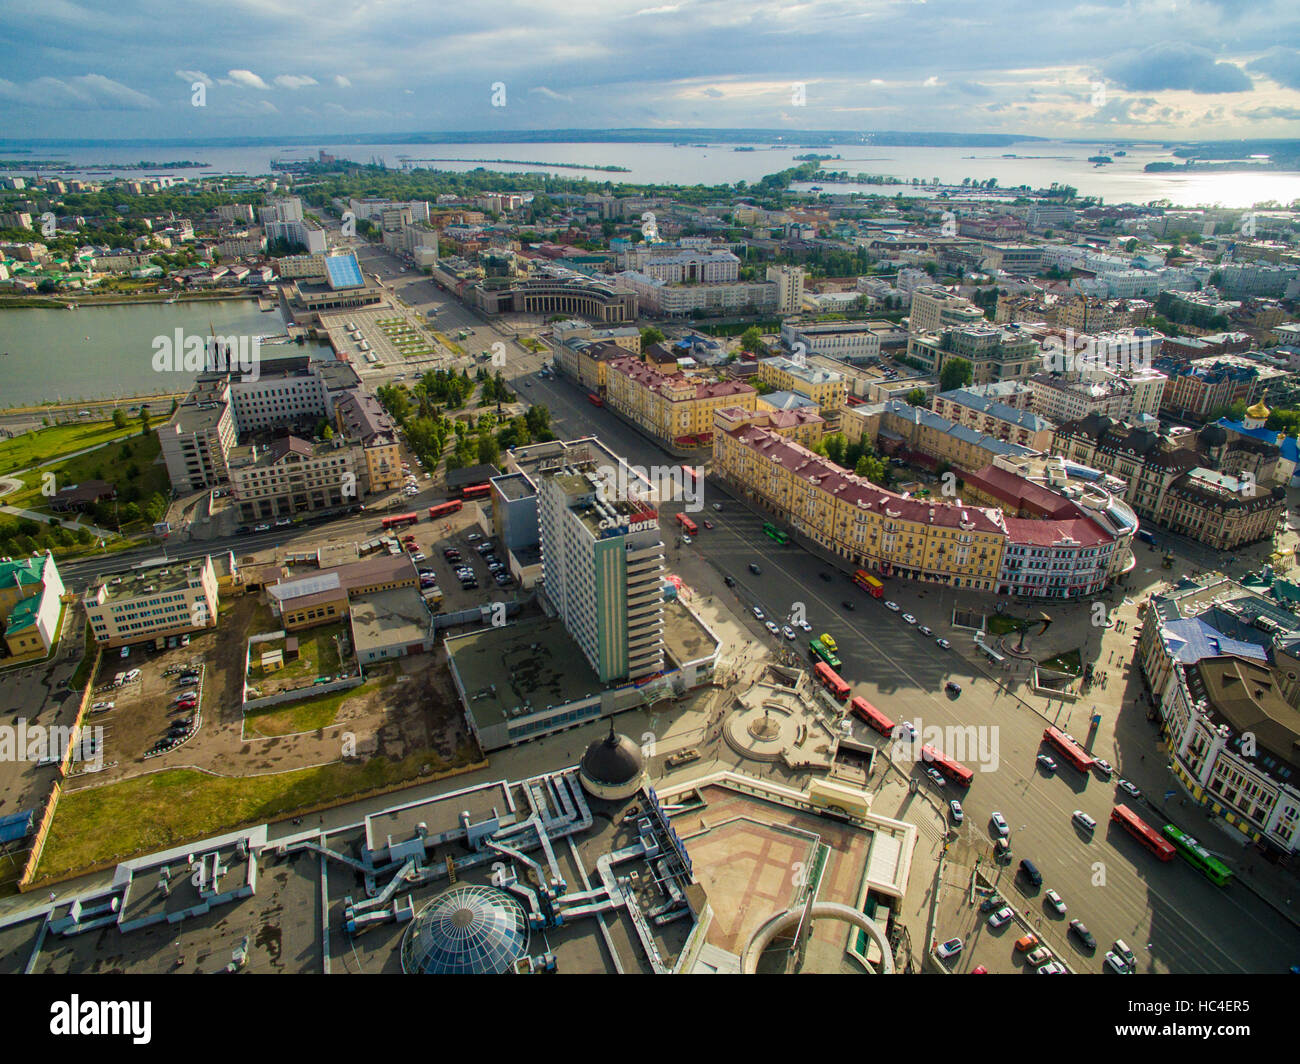 Kazan. Aerial view center of city at Grand Hotel Stock Photo - Alamy